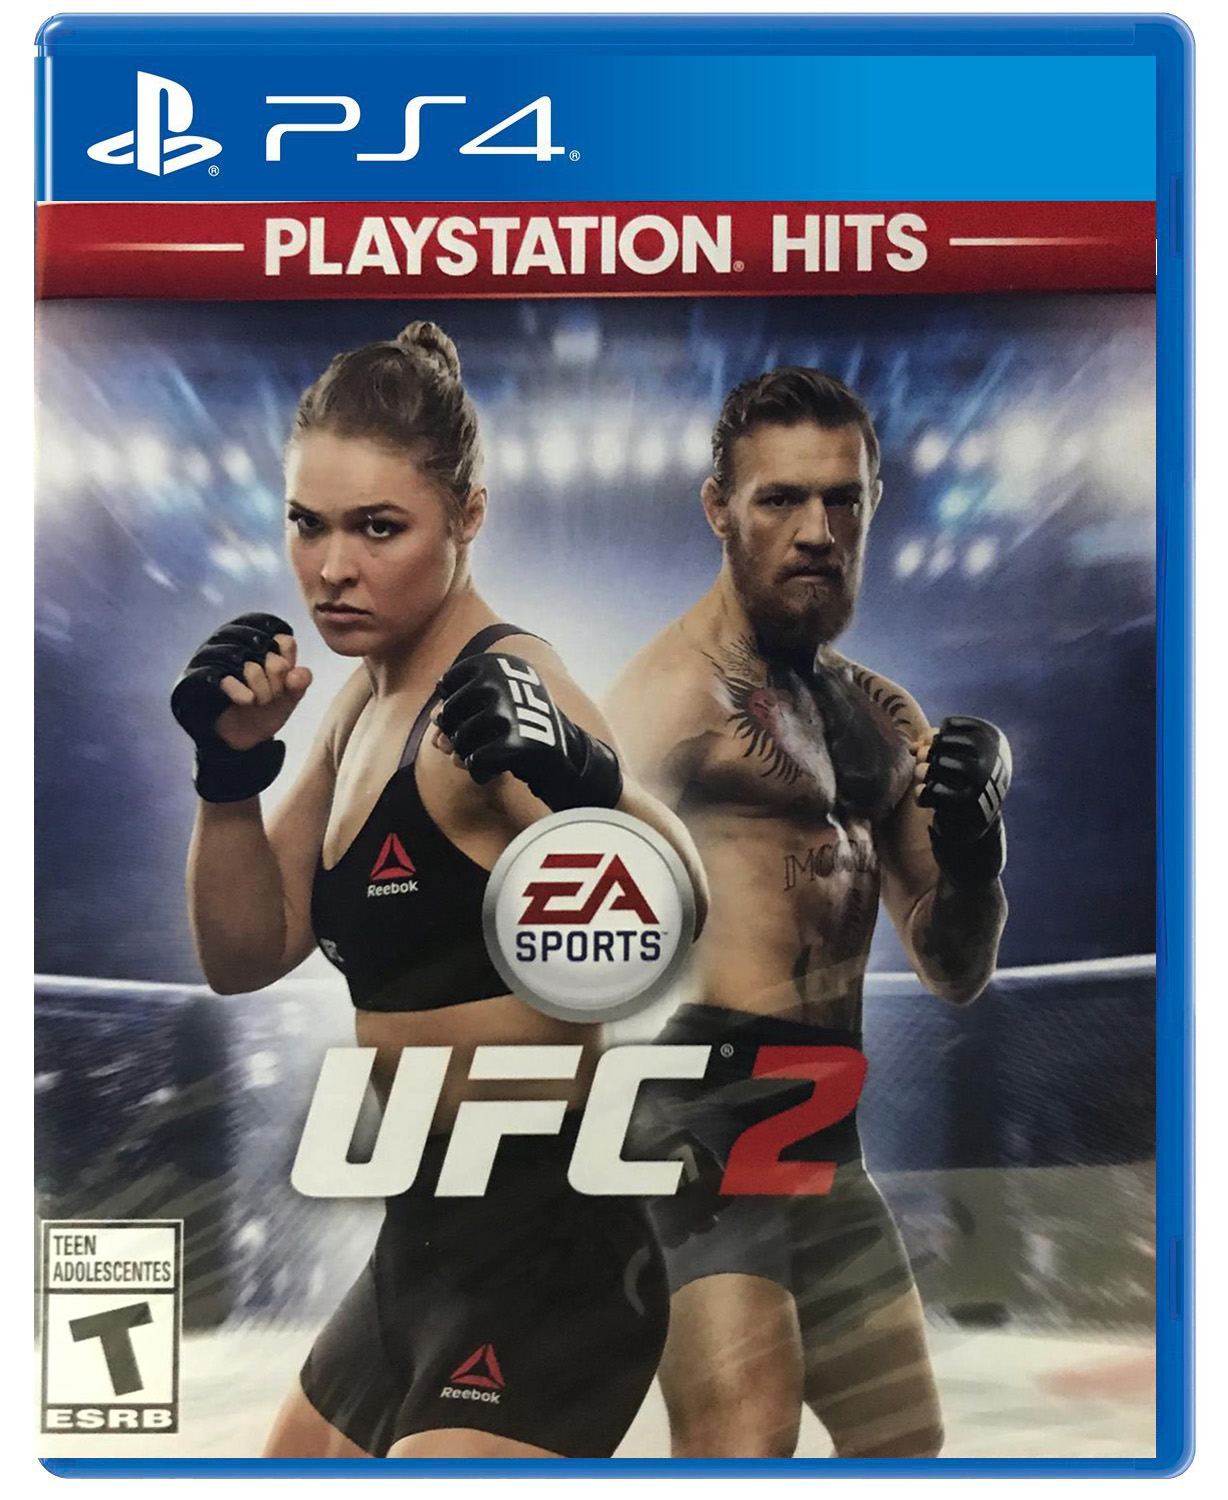 Sports UFC 2 (PlayStation Hits) for PlayStation 4